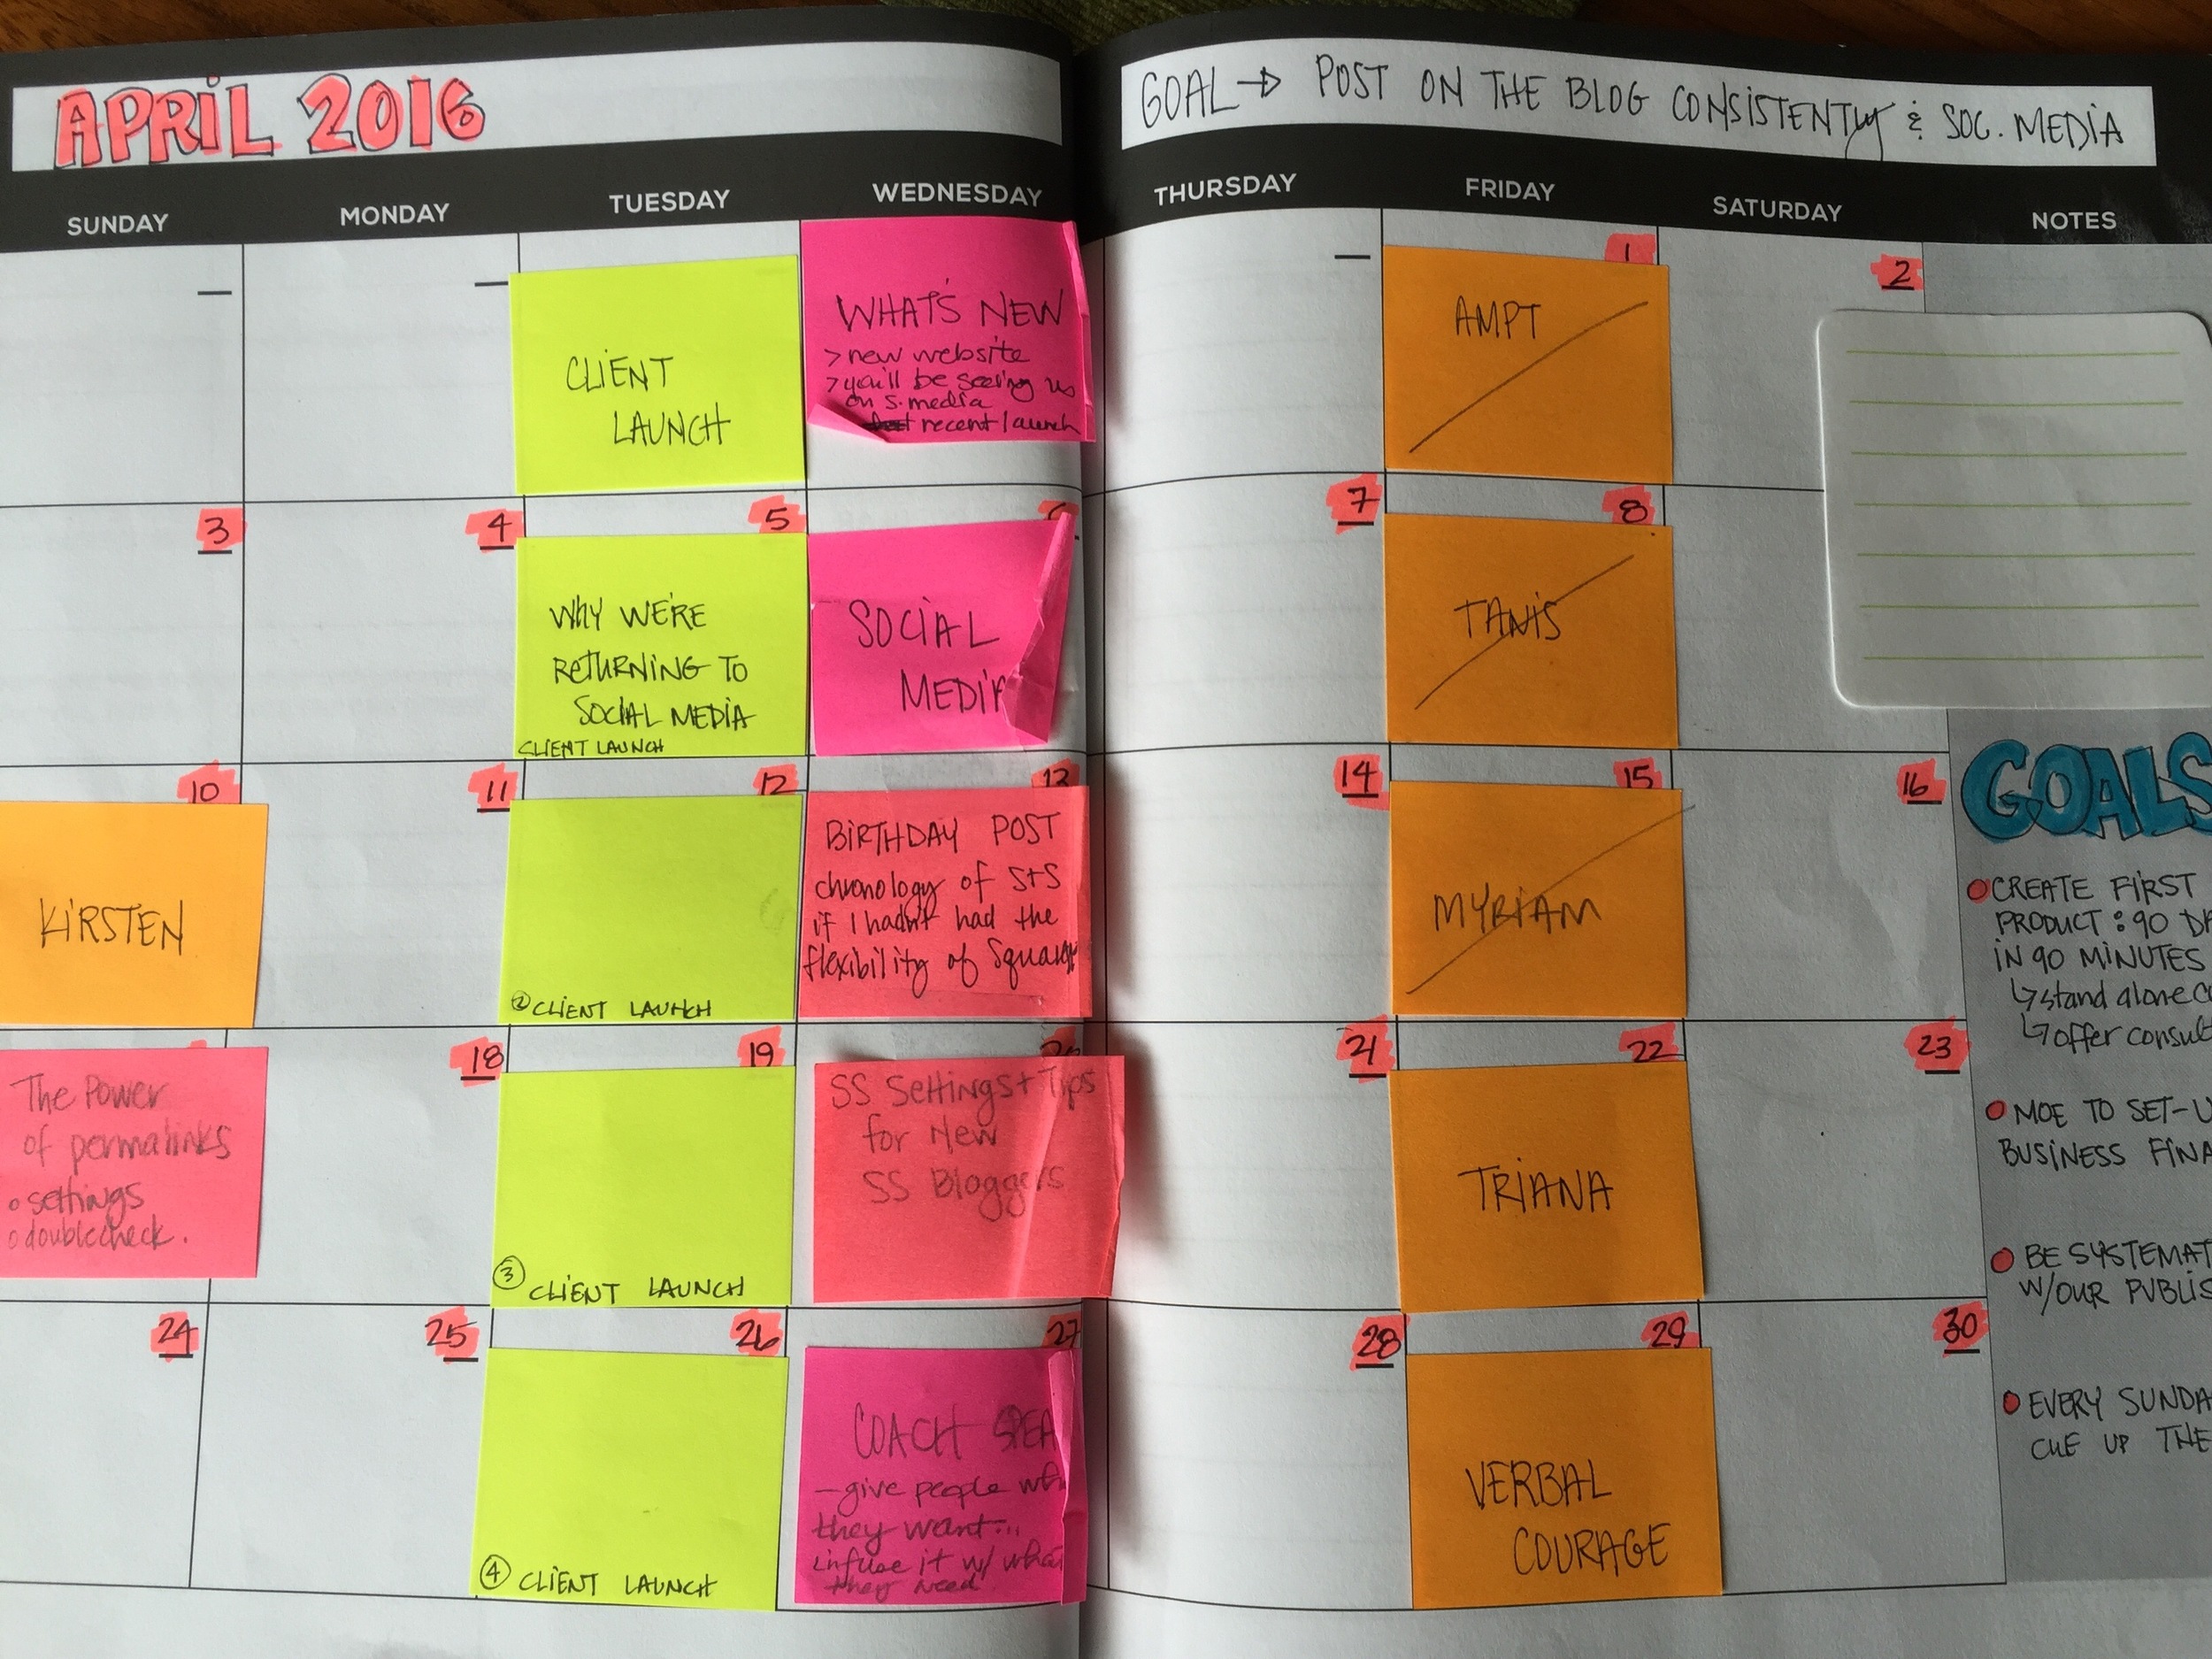 At the beginning of a month I get out a calendar and put sticky notes on the dates that I will be publishing.